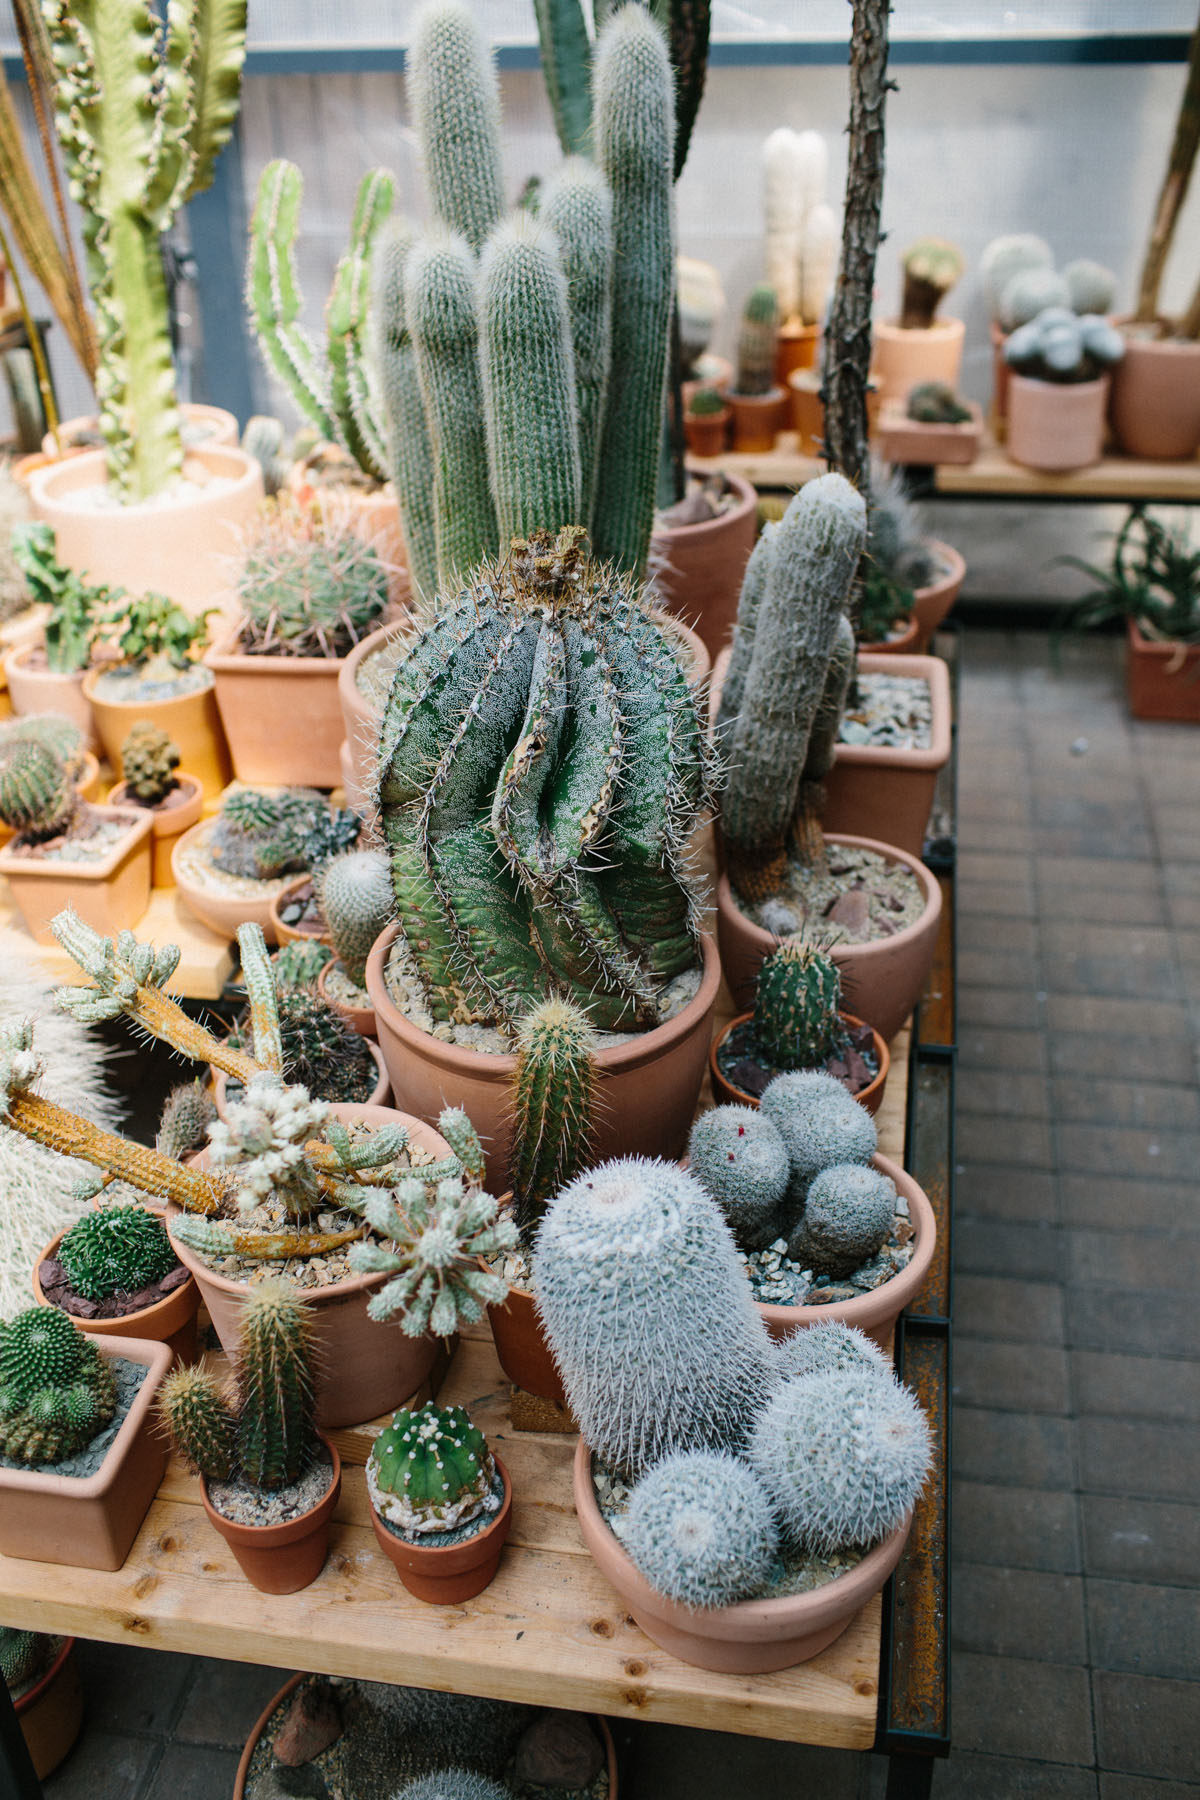 Cactus Pop-Up Shop in Chinatown